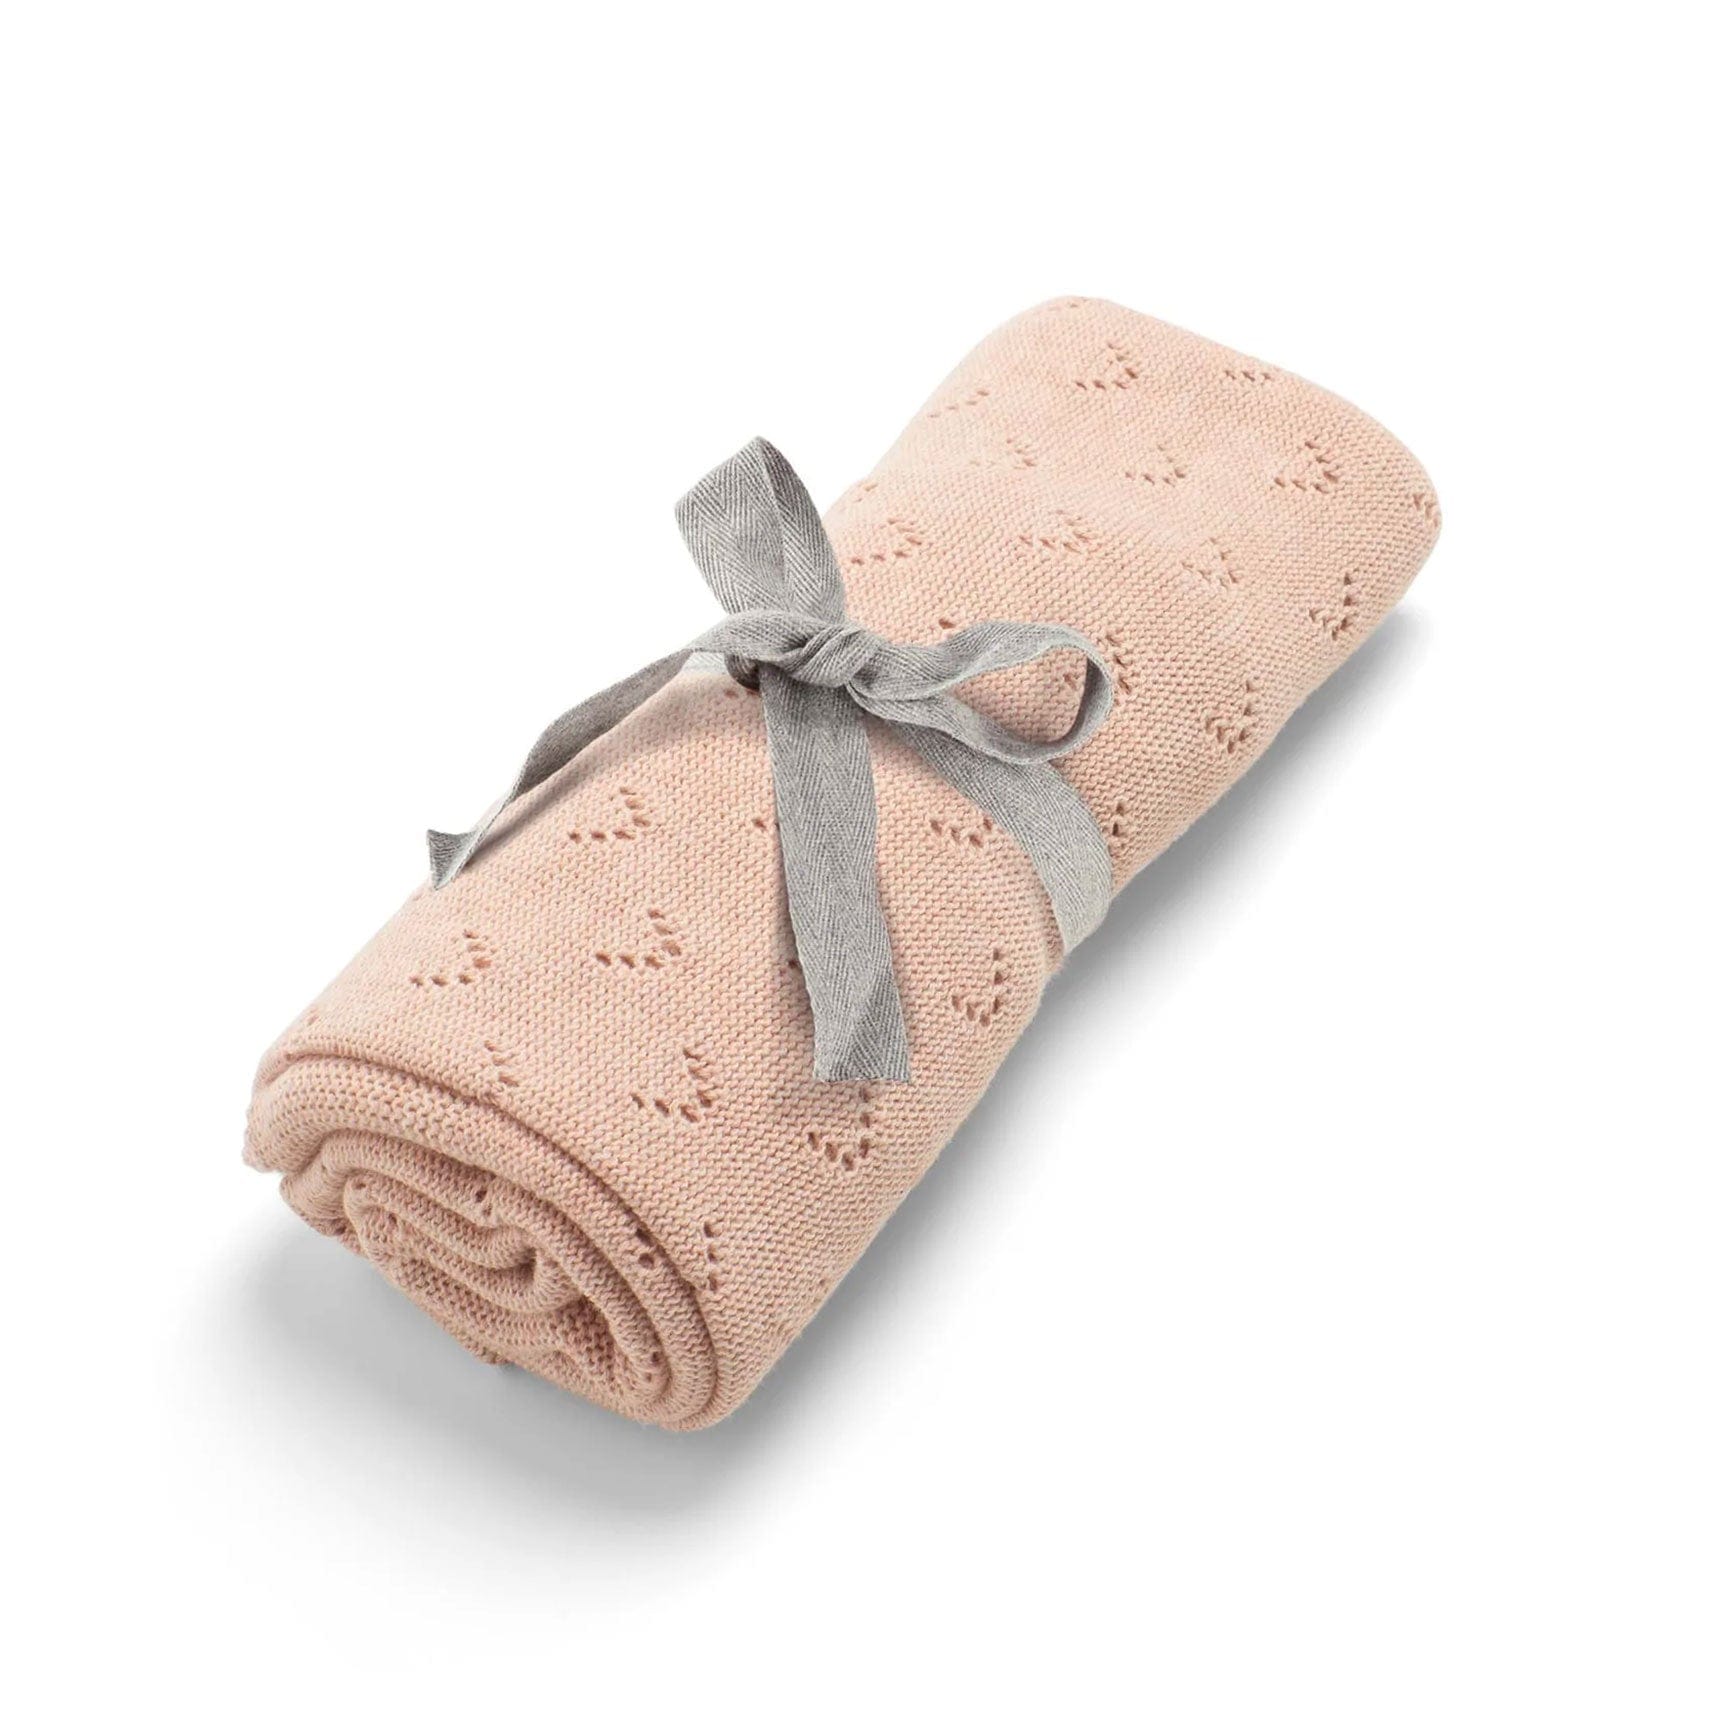 Mamas & Papas Cot & Cot Bed Blankets Mamas & Papas Knitted Blanket Small - Pink Pointelle 7883GY001